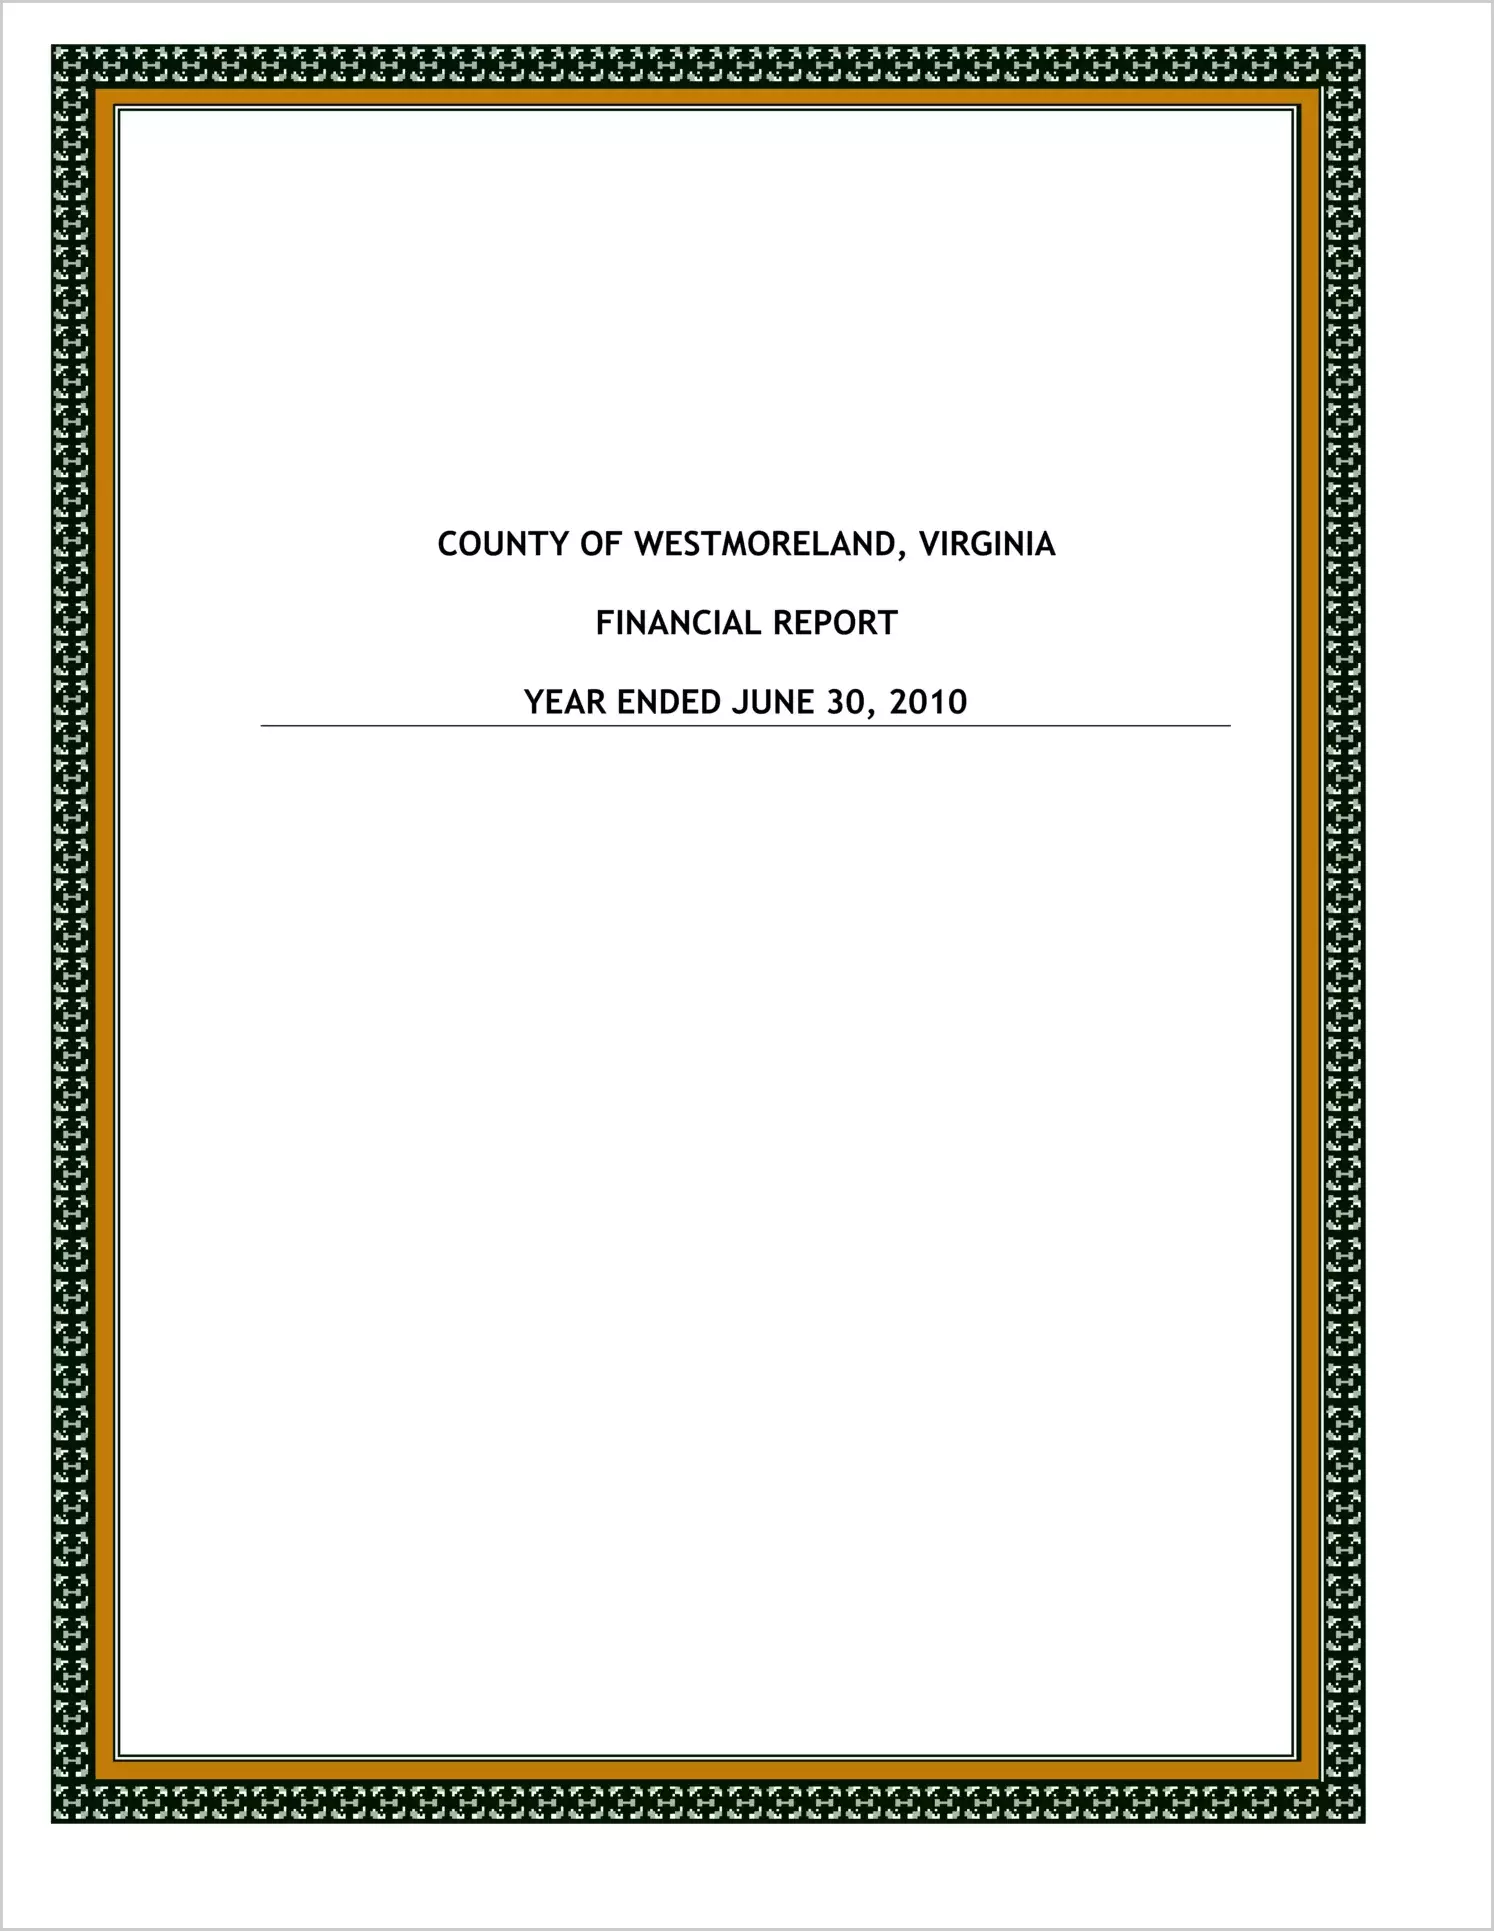 2010 Annual Financial Report for County of Westmoreland